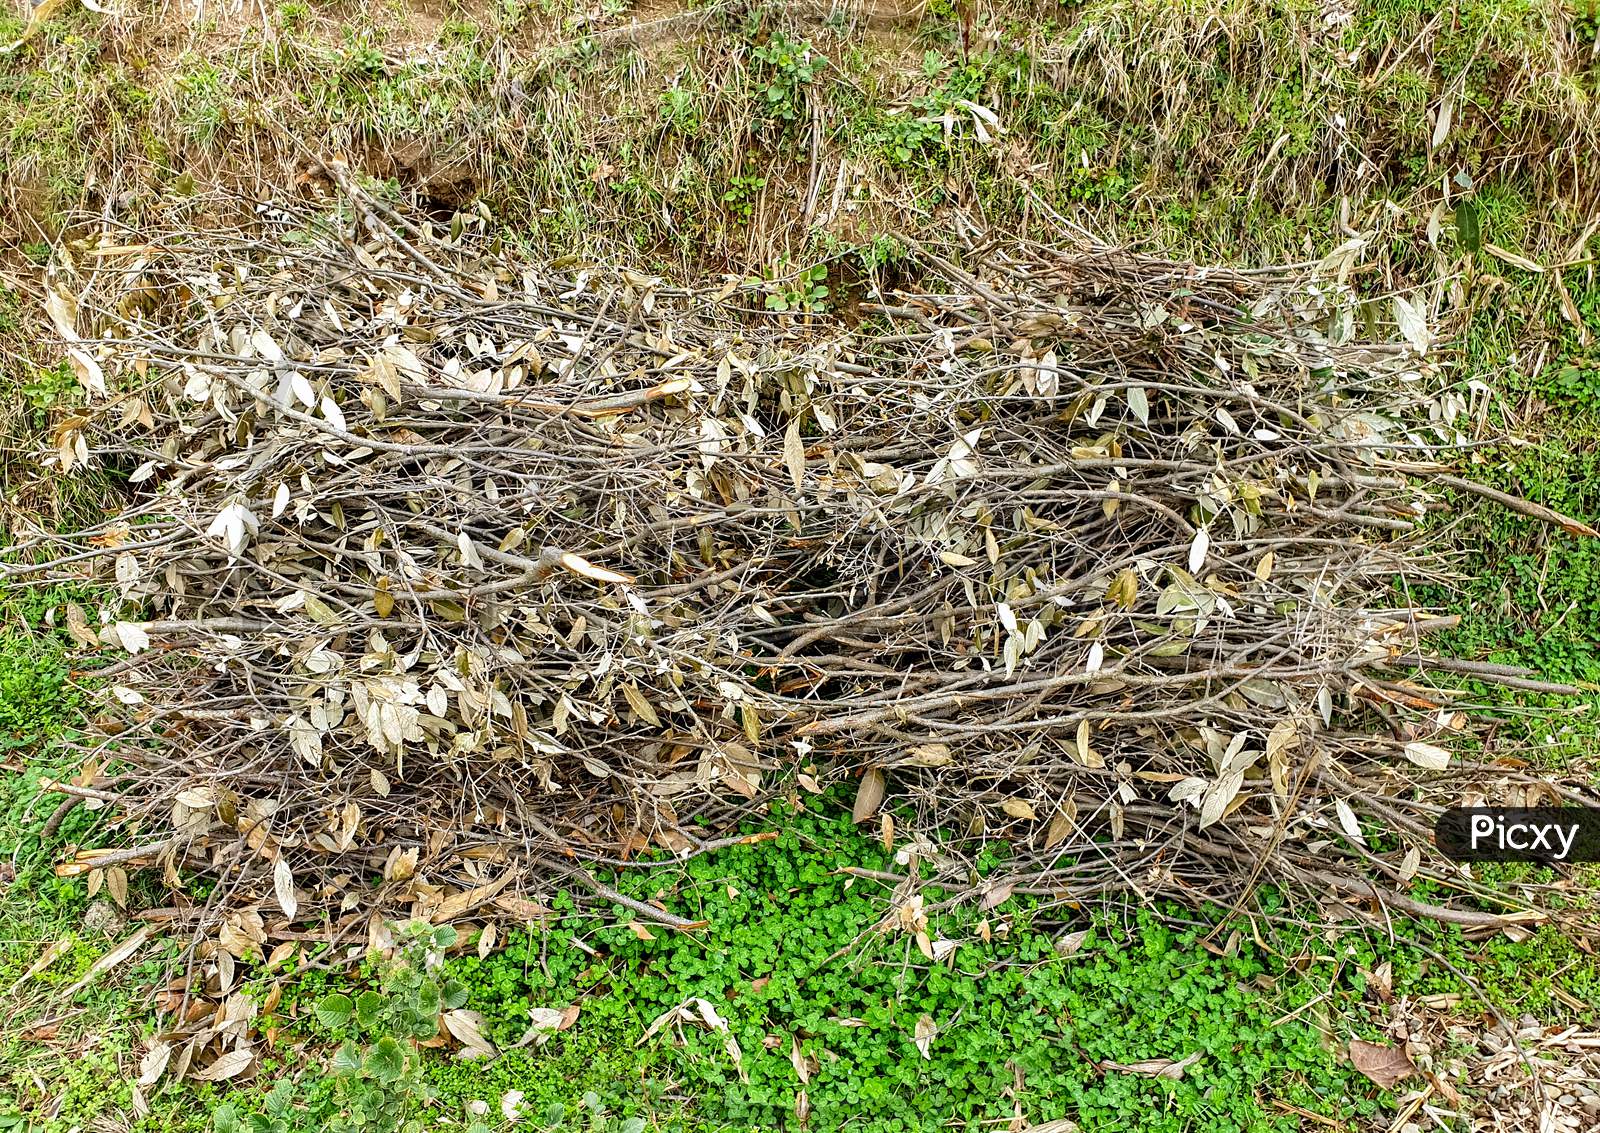 Photo of sticks of kindling wood laid on the surface of ground for make them dry